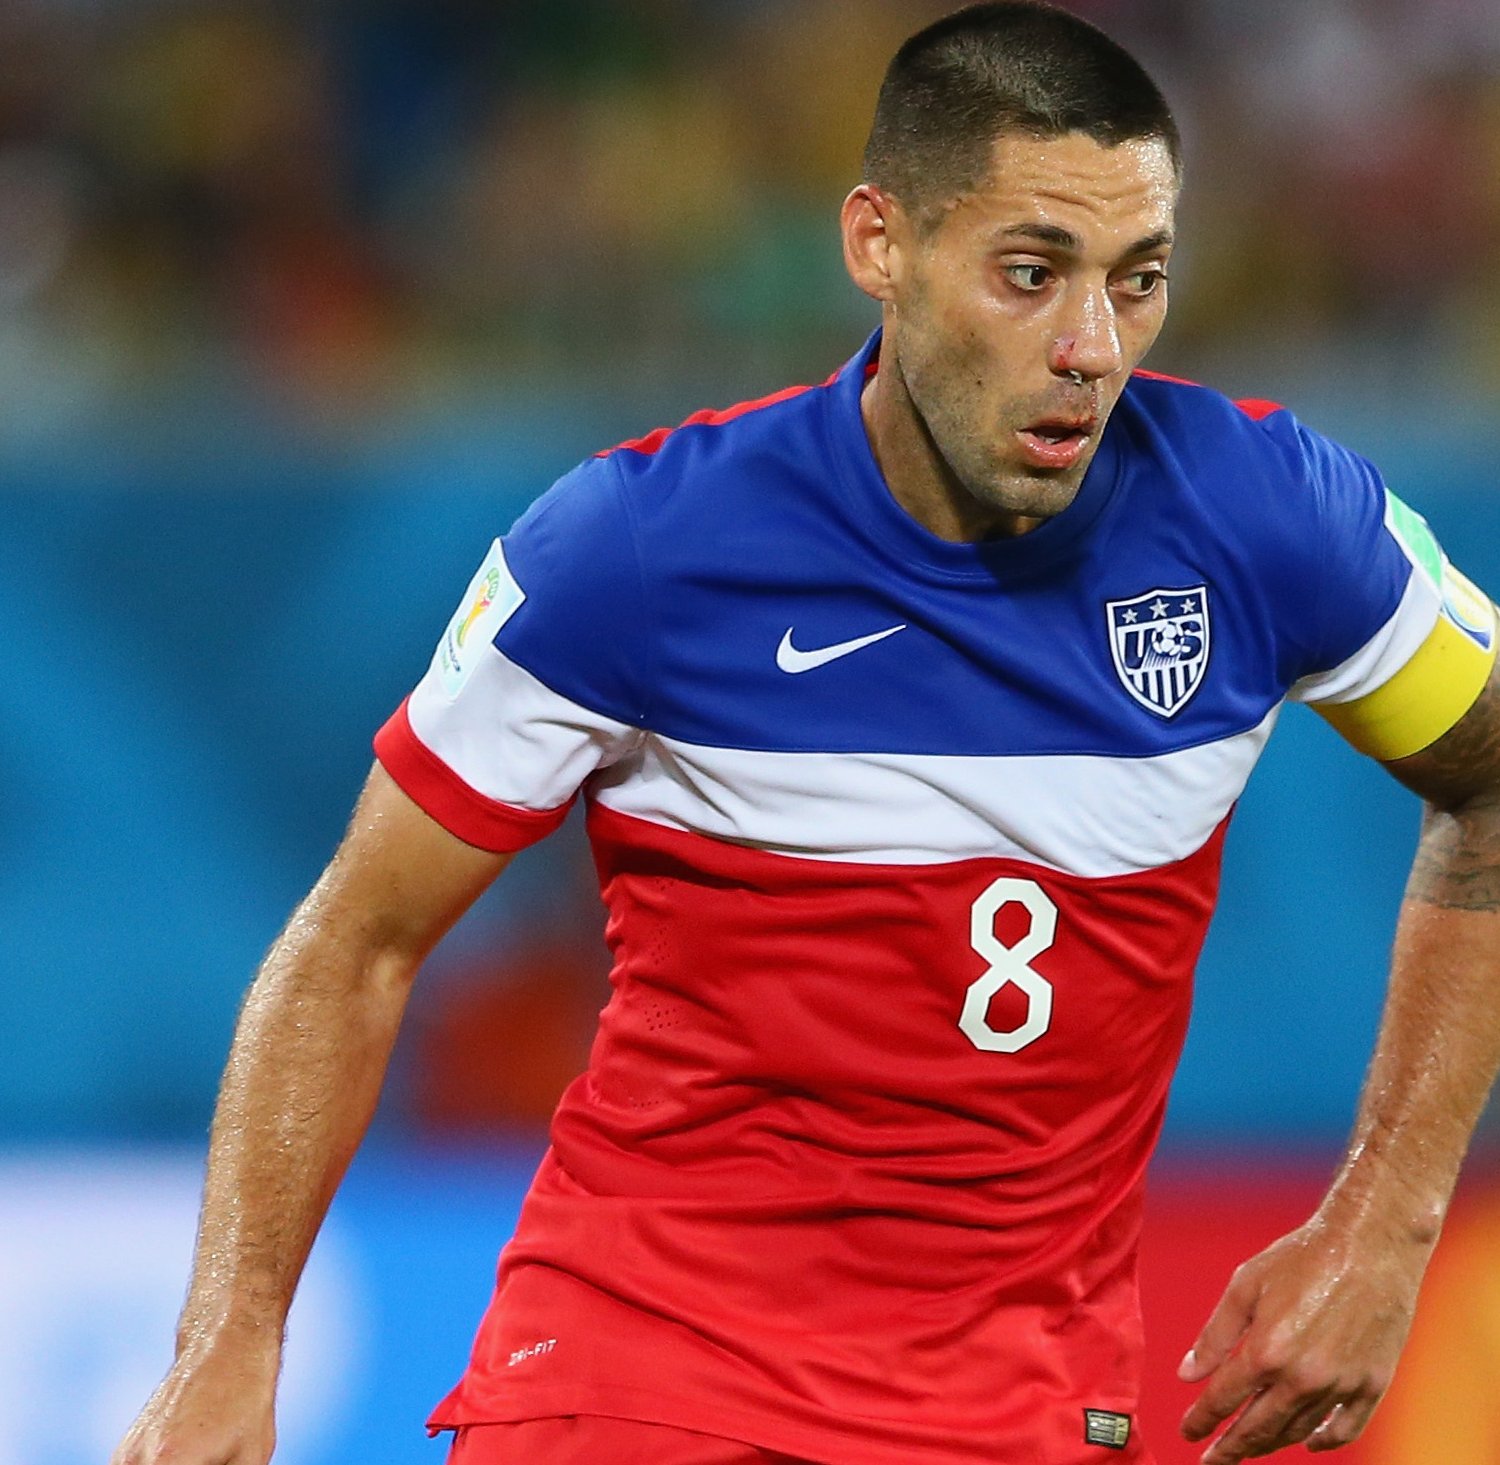 USA vs. Portugal Live Score, Highlights for World Cup Group G Game